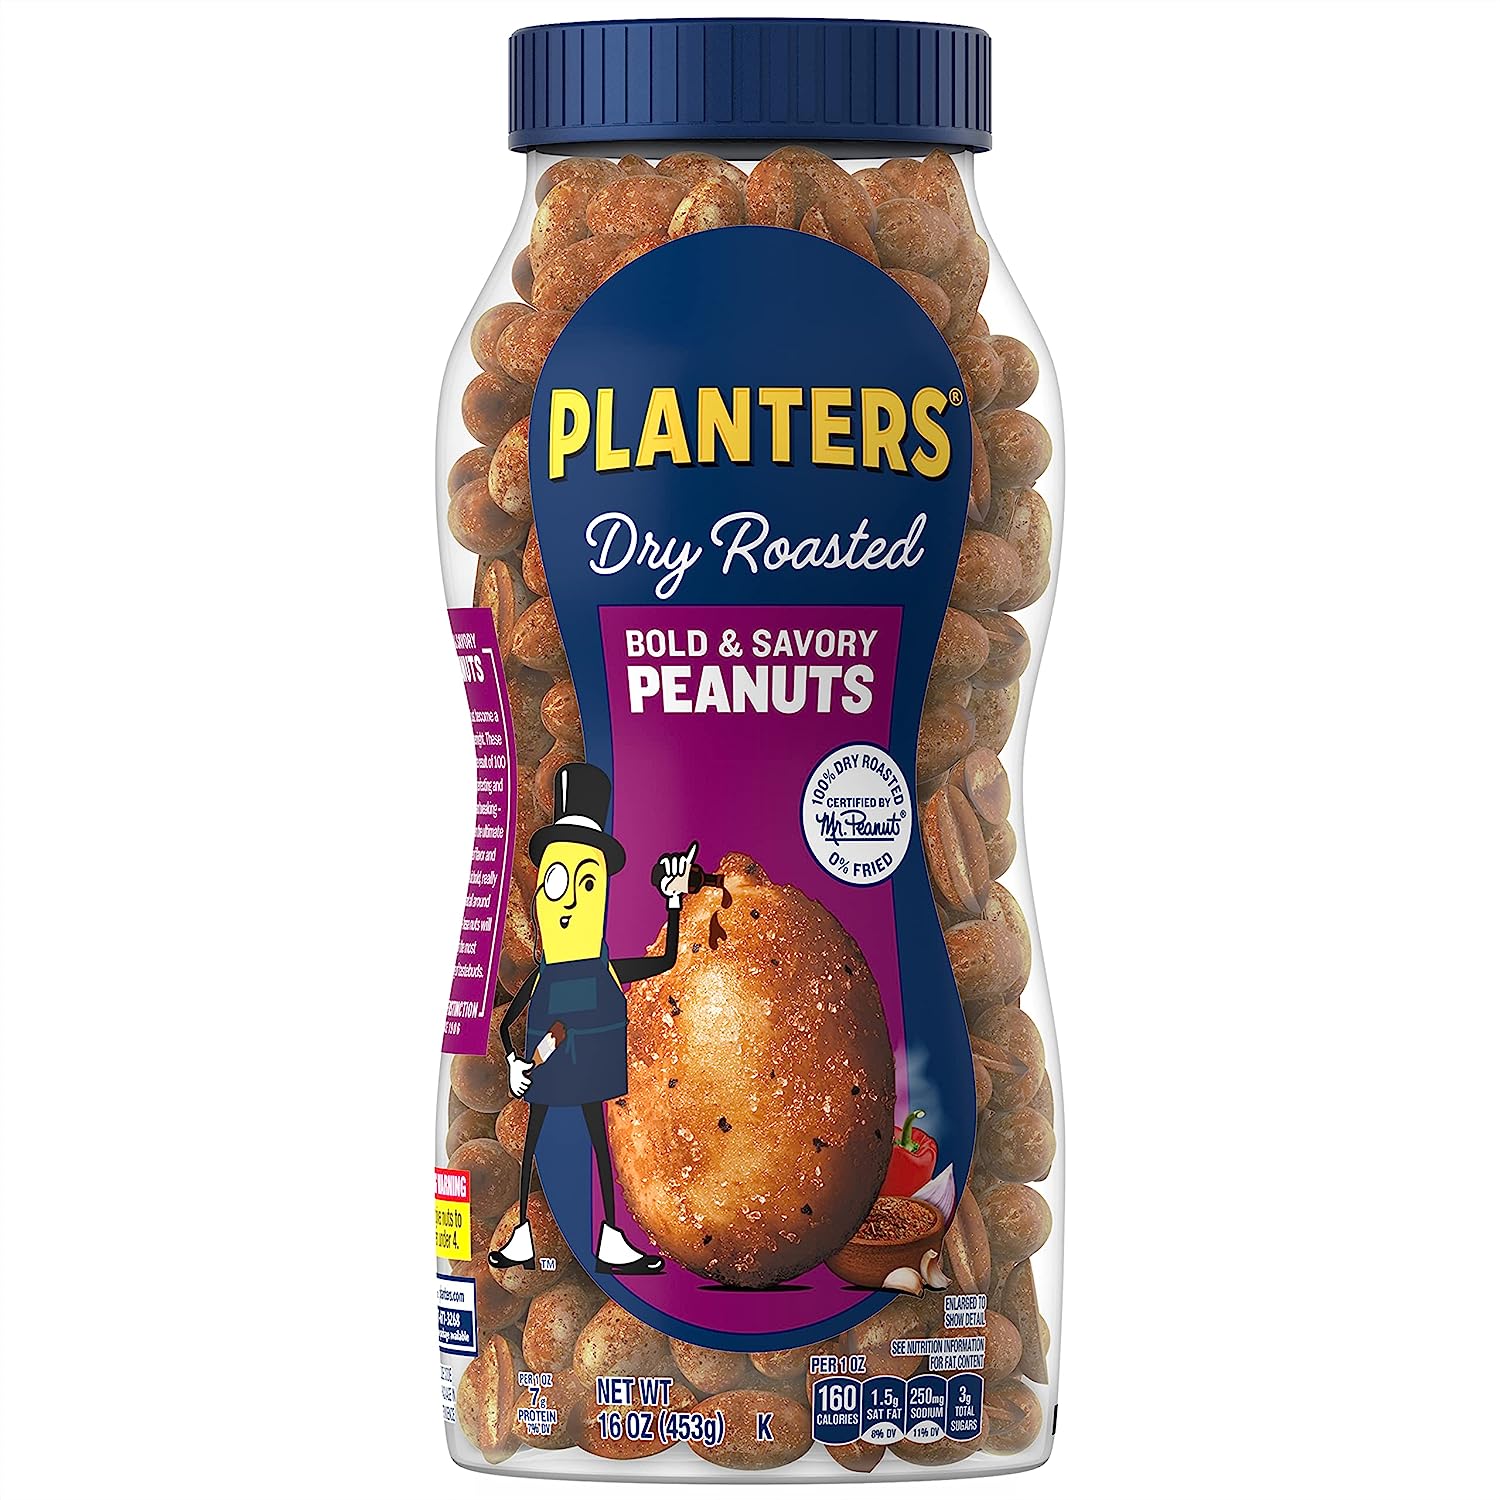 16-Oz PLANTERS Dry Roasted Bold & Savory Peanuts $2.40 and More + Free Shipping w/ Prime or on $25+